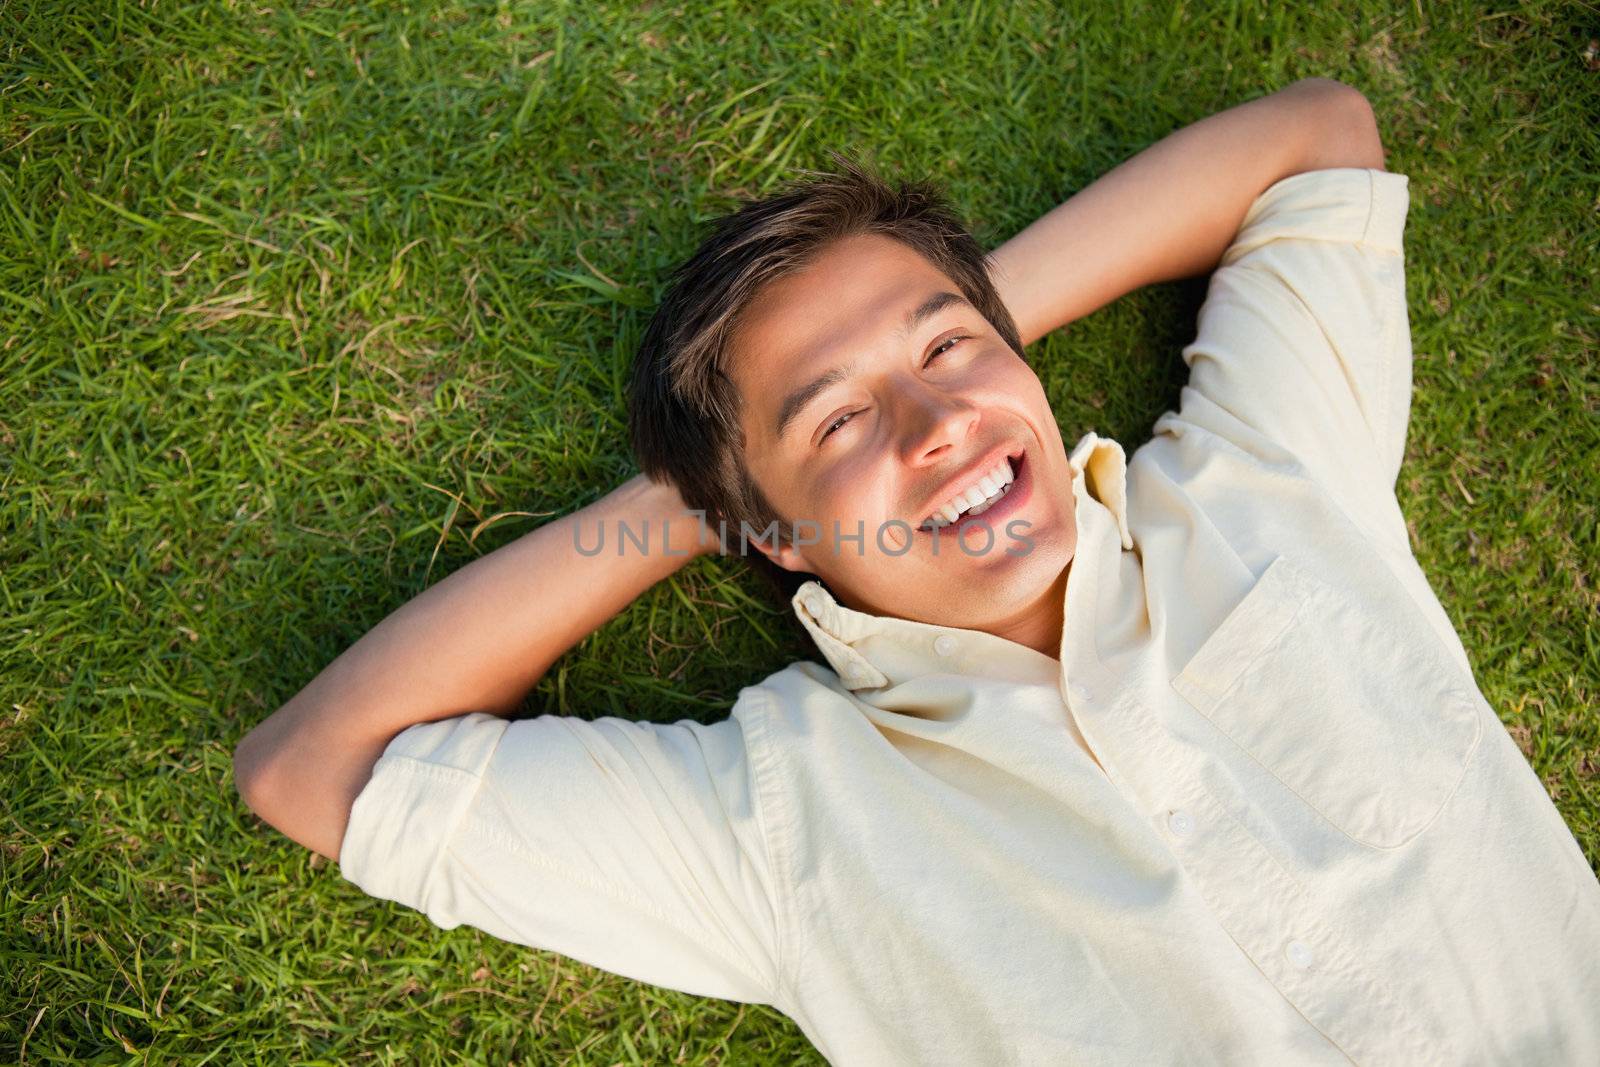 Smiling man lying with both hands resting behind his neck on the grass